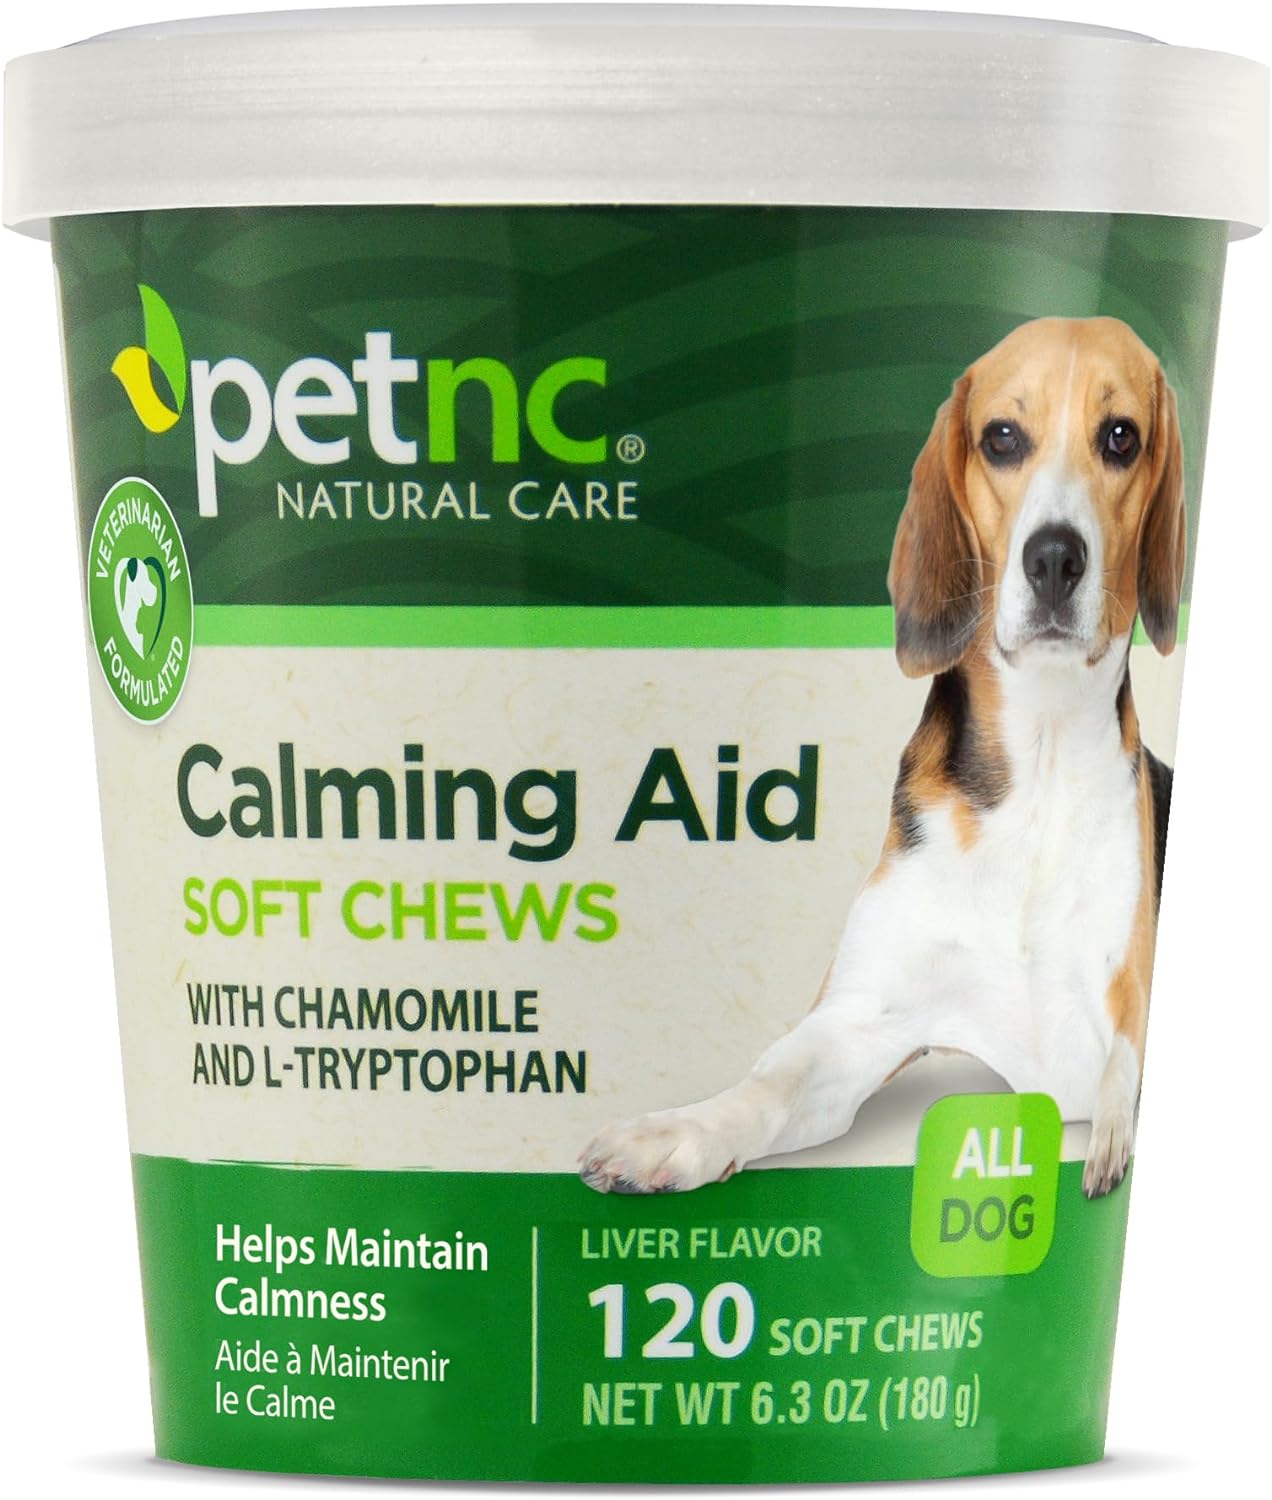 PetNC Natural Care Calming Aid Soft Chews for Dogs, 120 Count